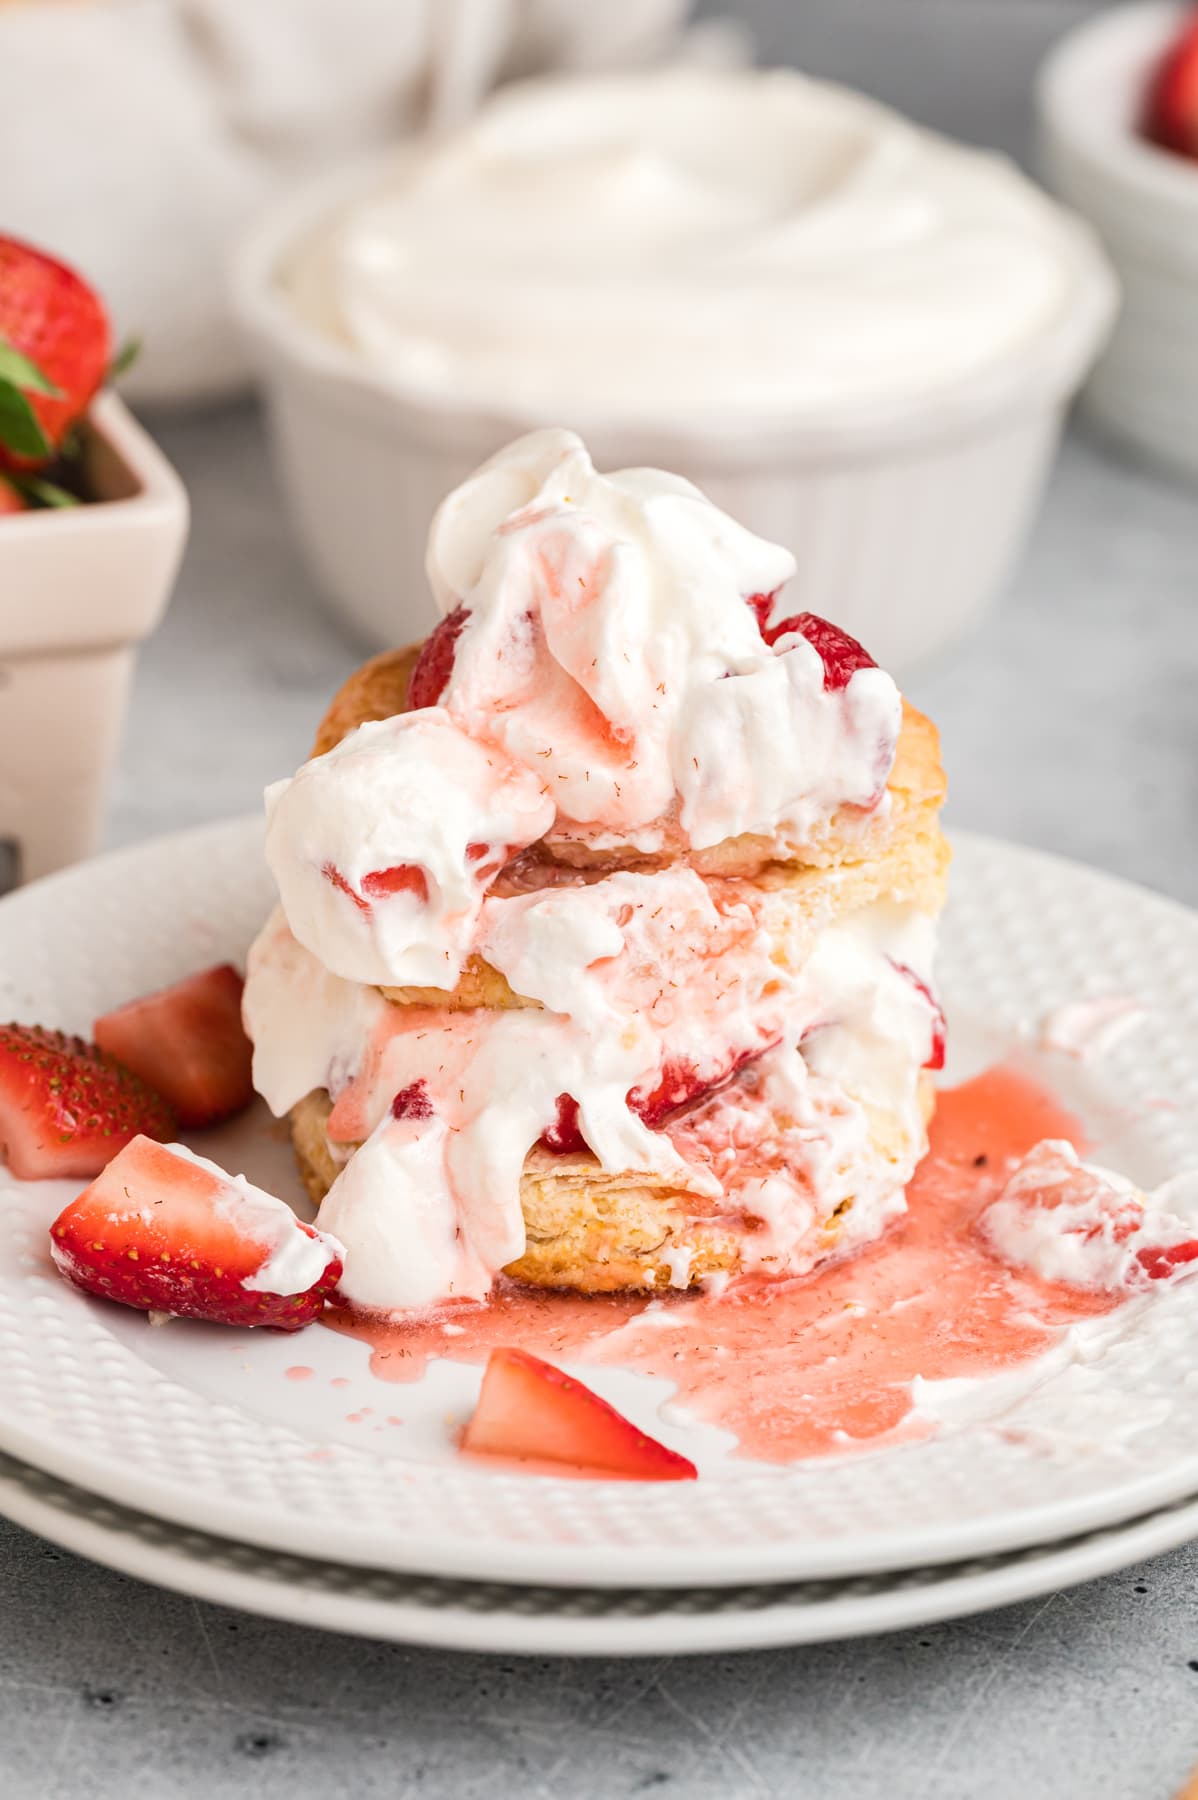 Easy strawberry shortcake that's had a few bites taken out of it